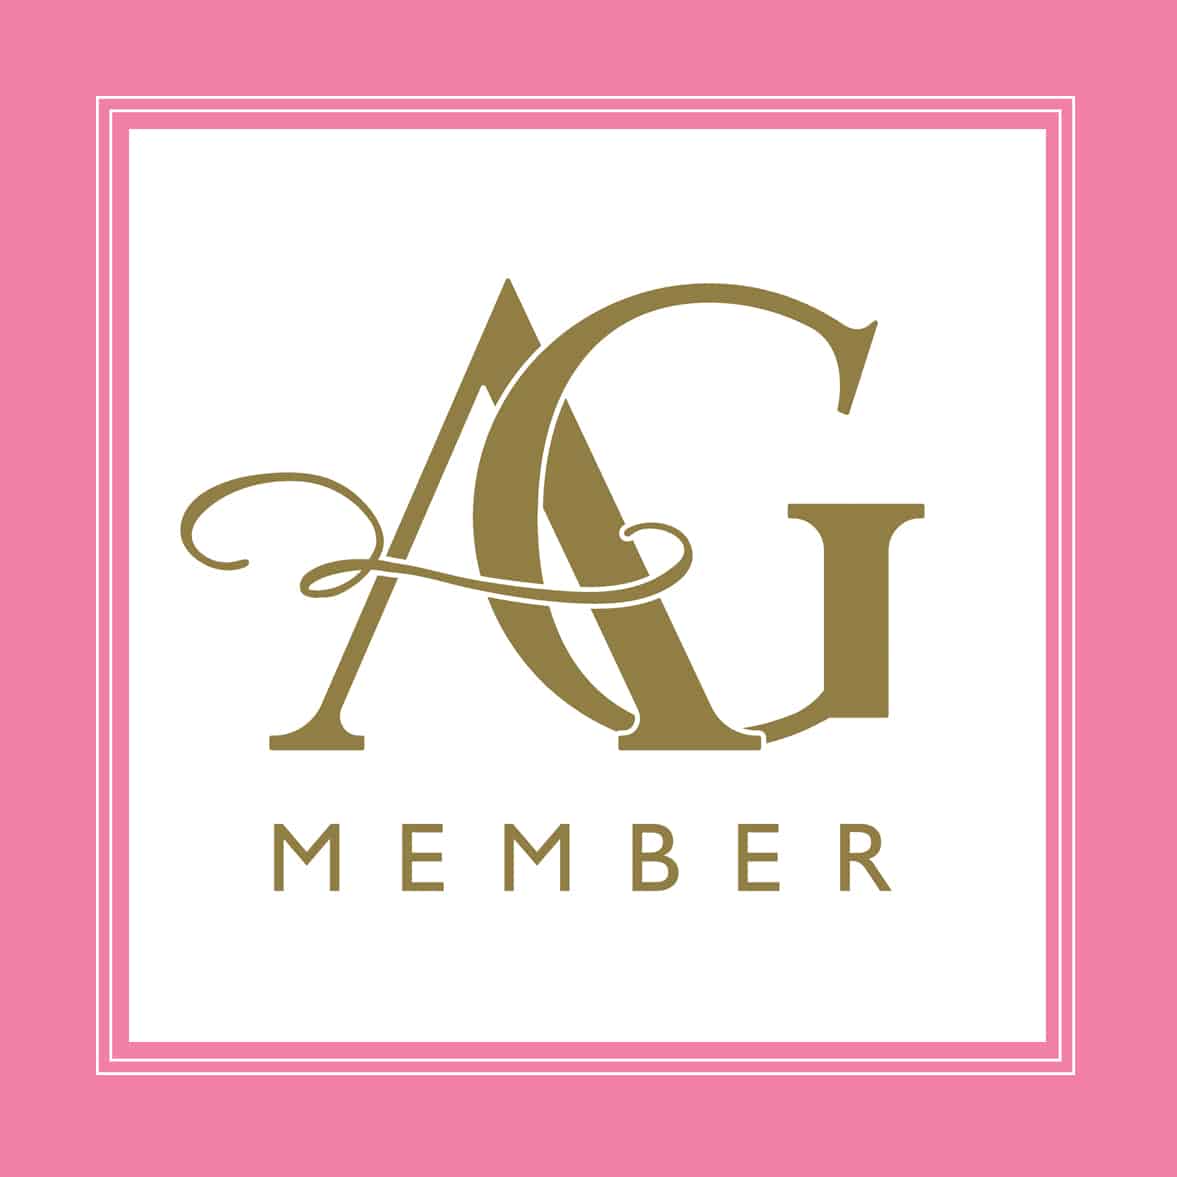 Anna Griffin AG Membership logo on a pink background.